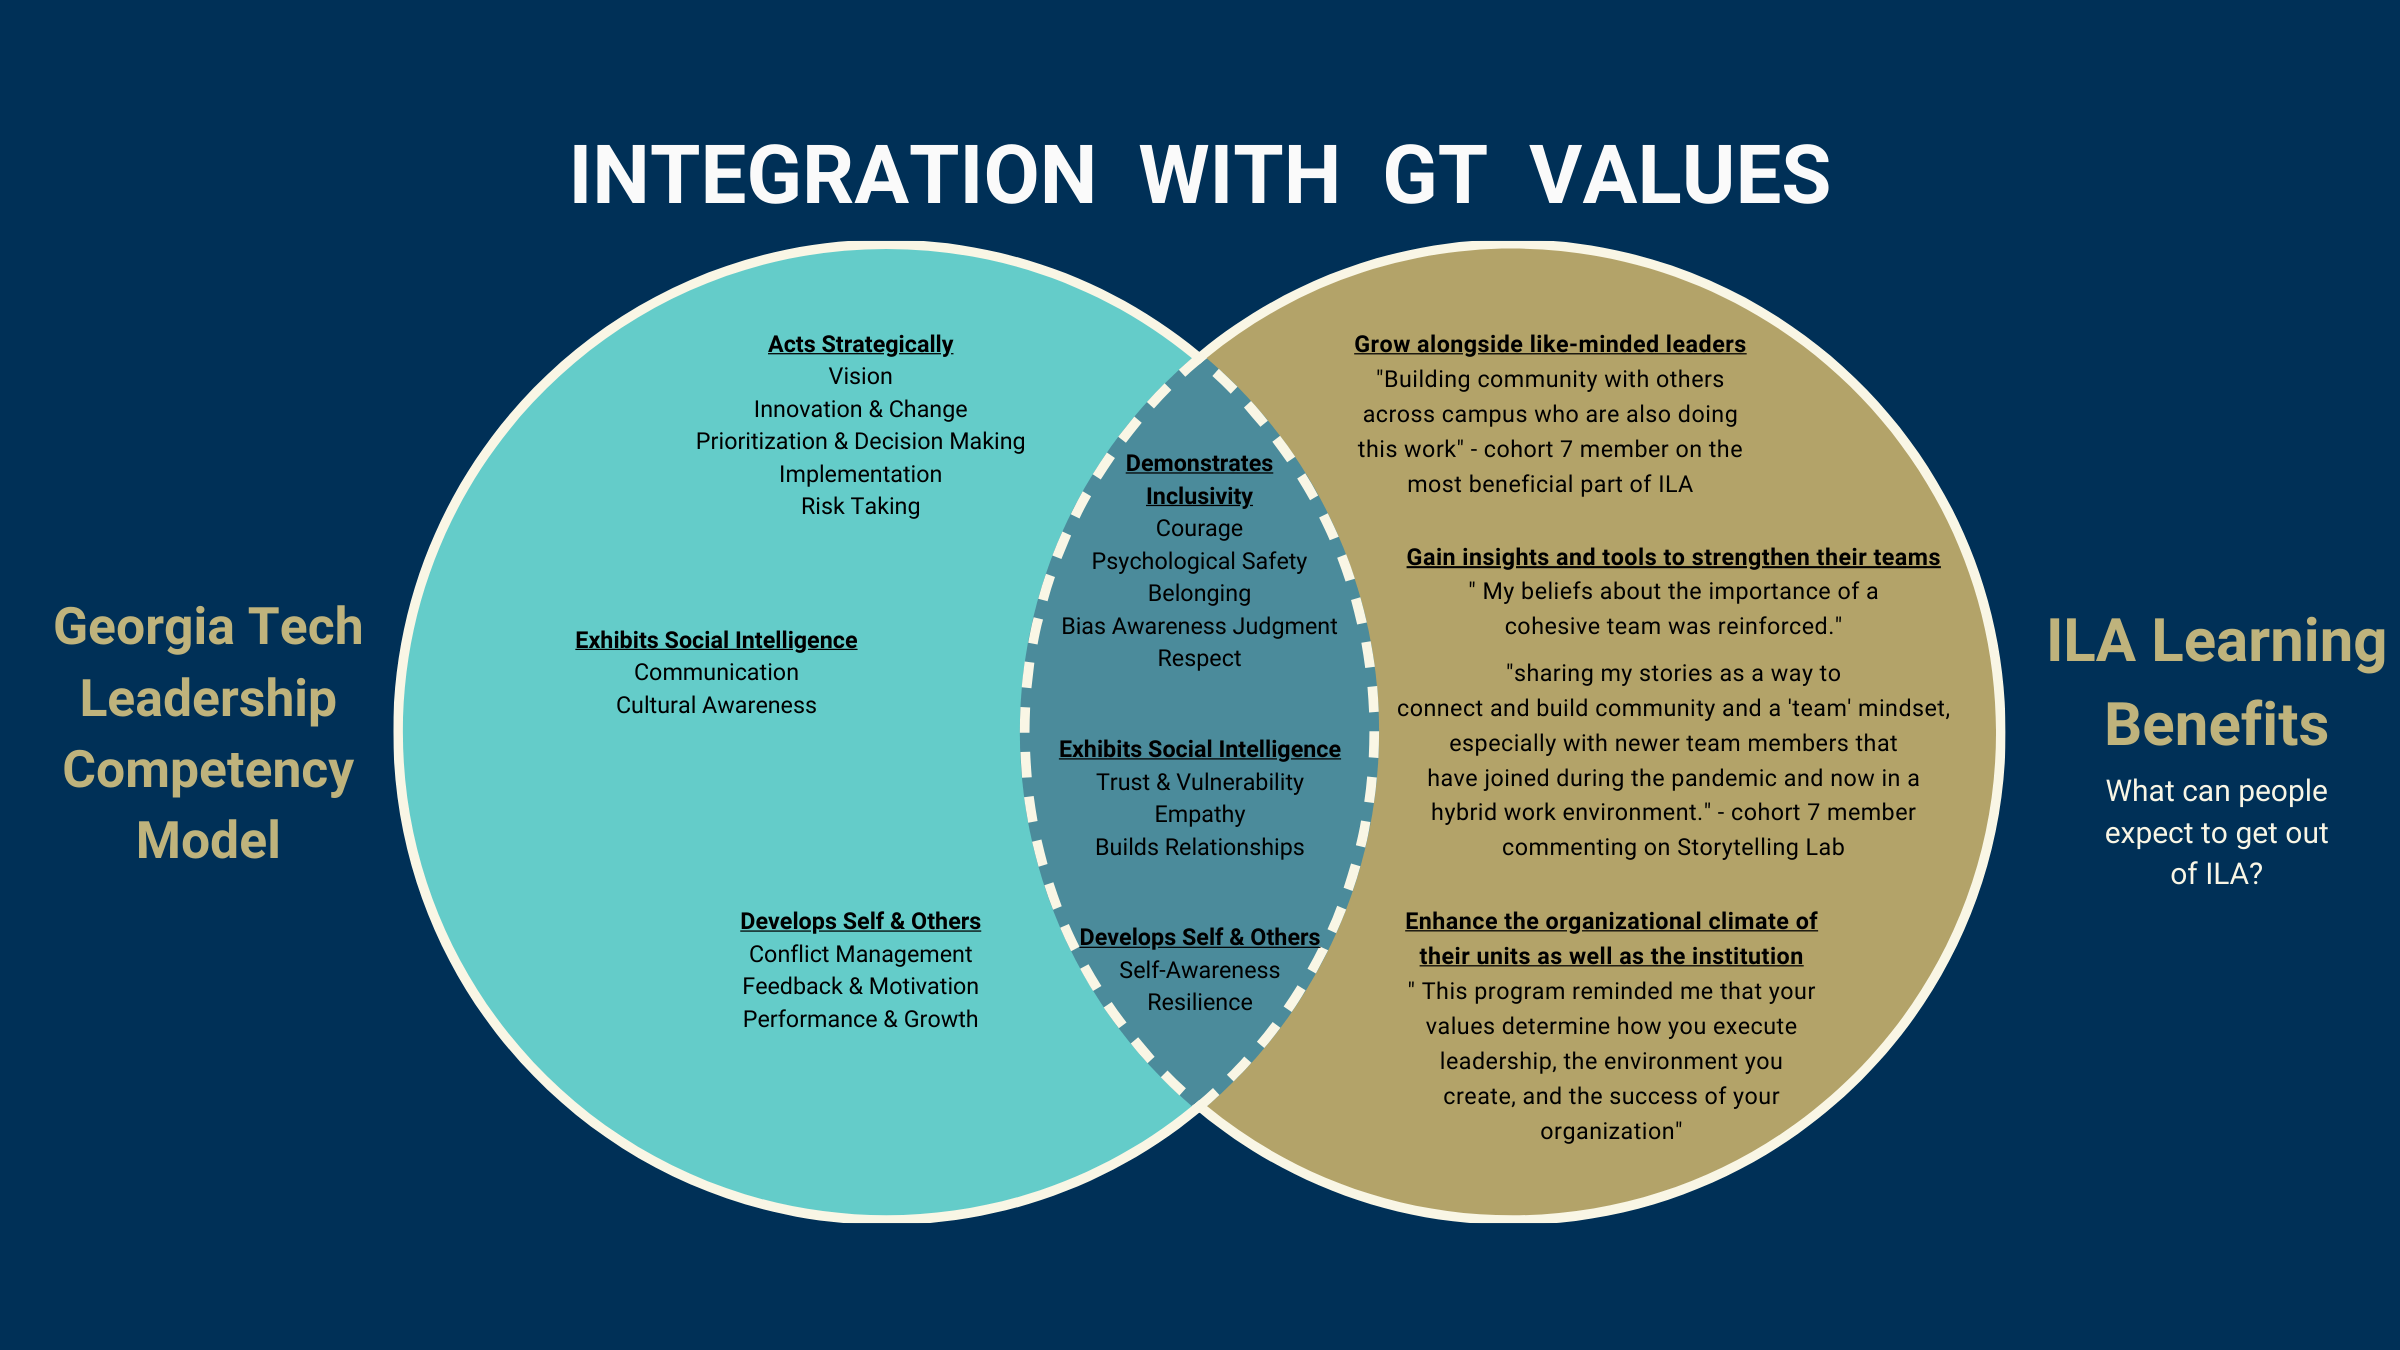 A venn diagram is displayed showing the overlap between GT Core Competencies and the goals of the Inclusive Leader's Academy